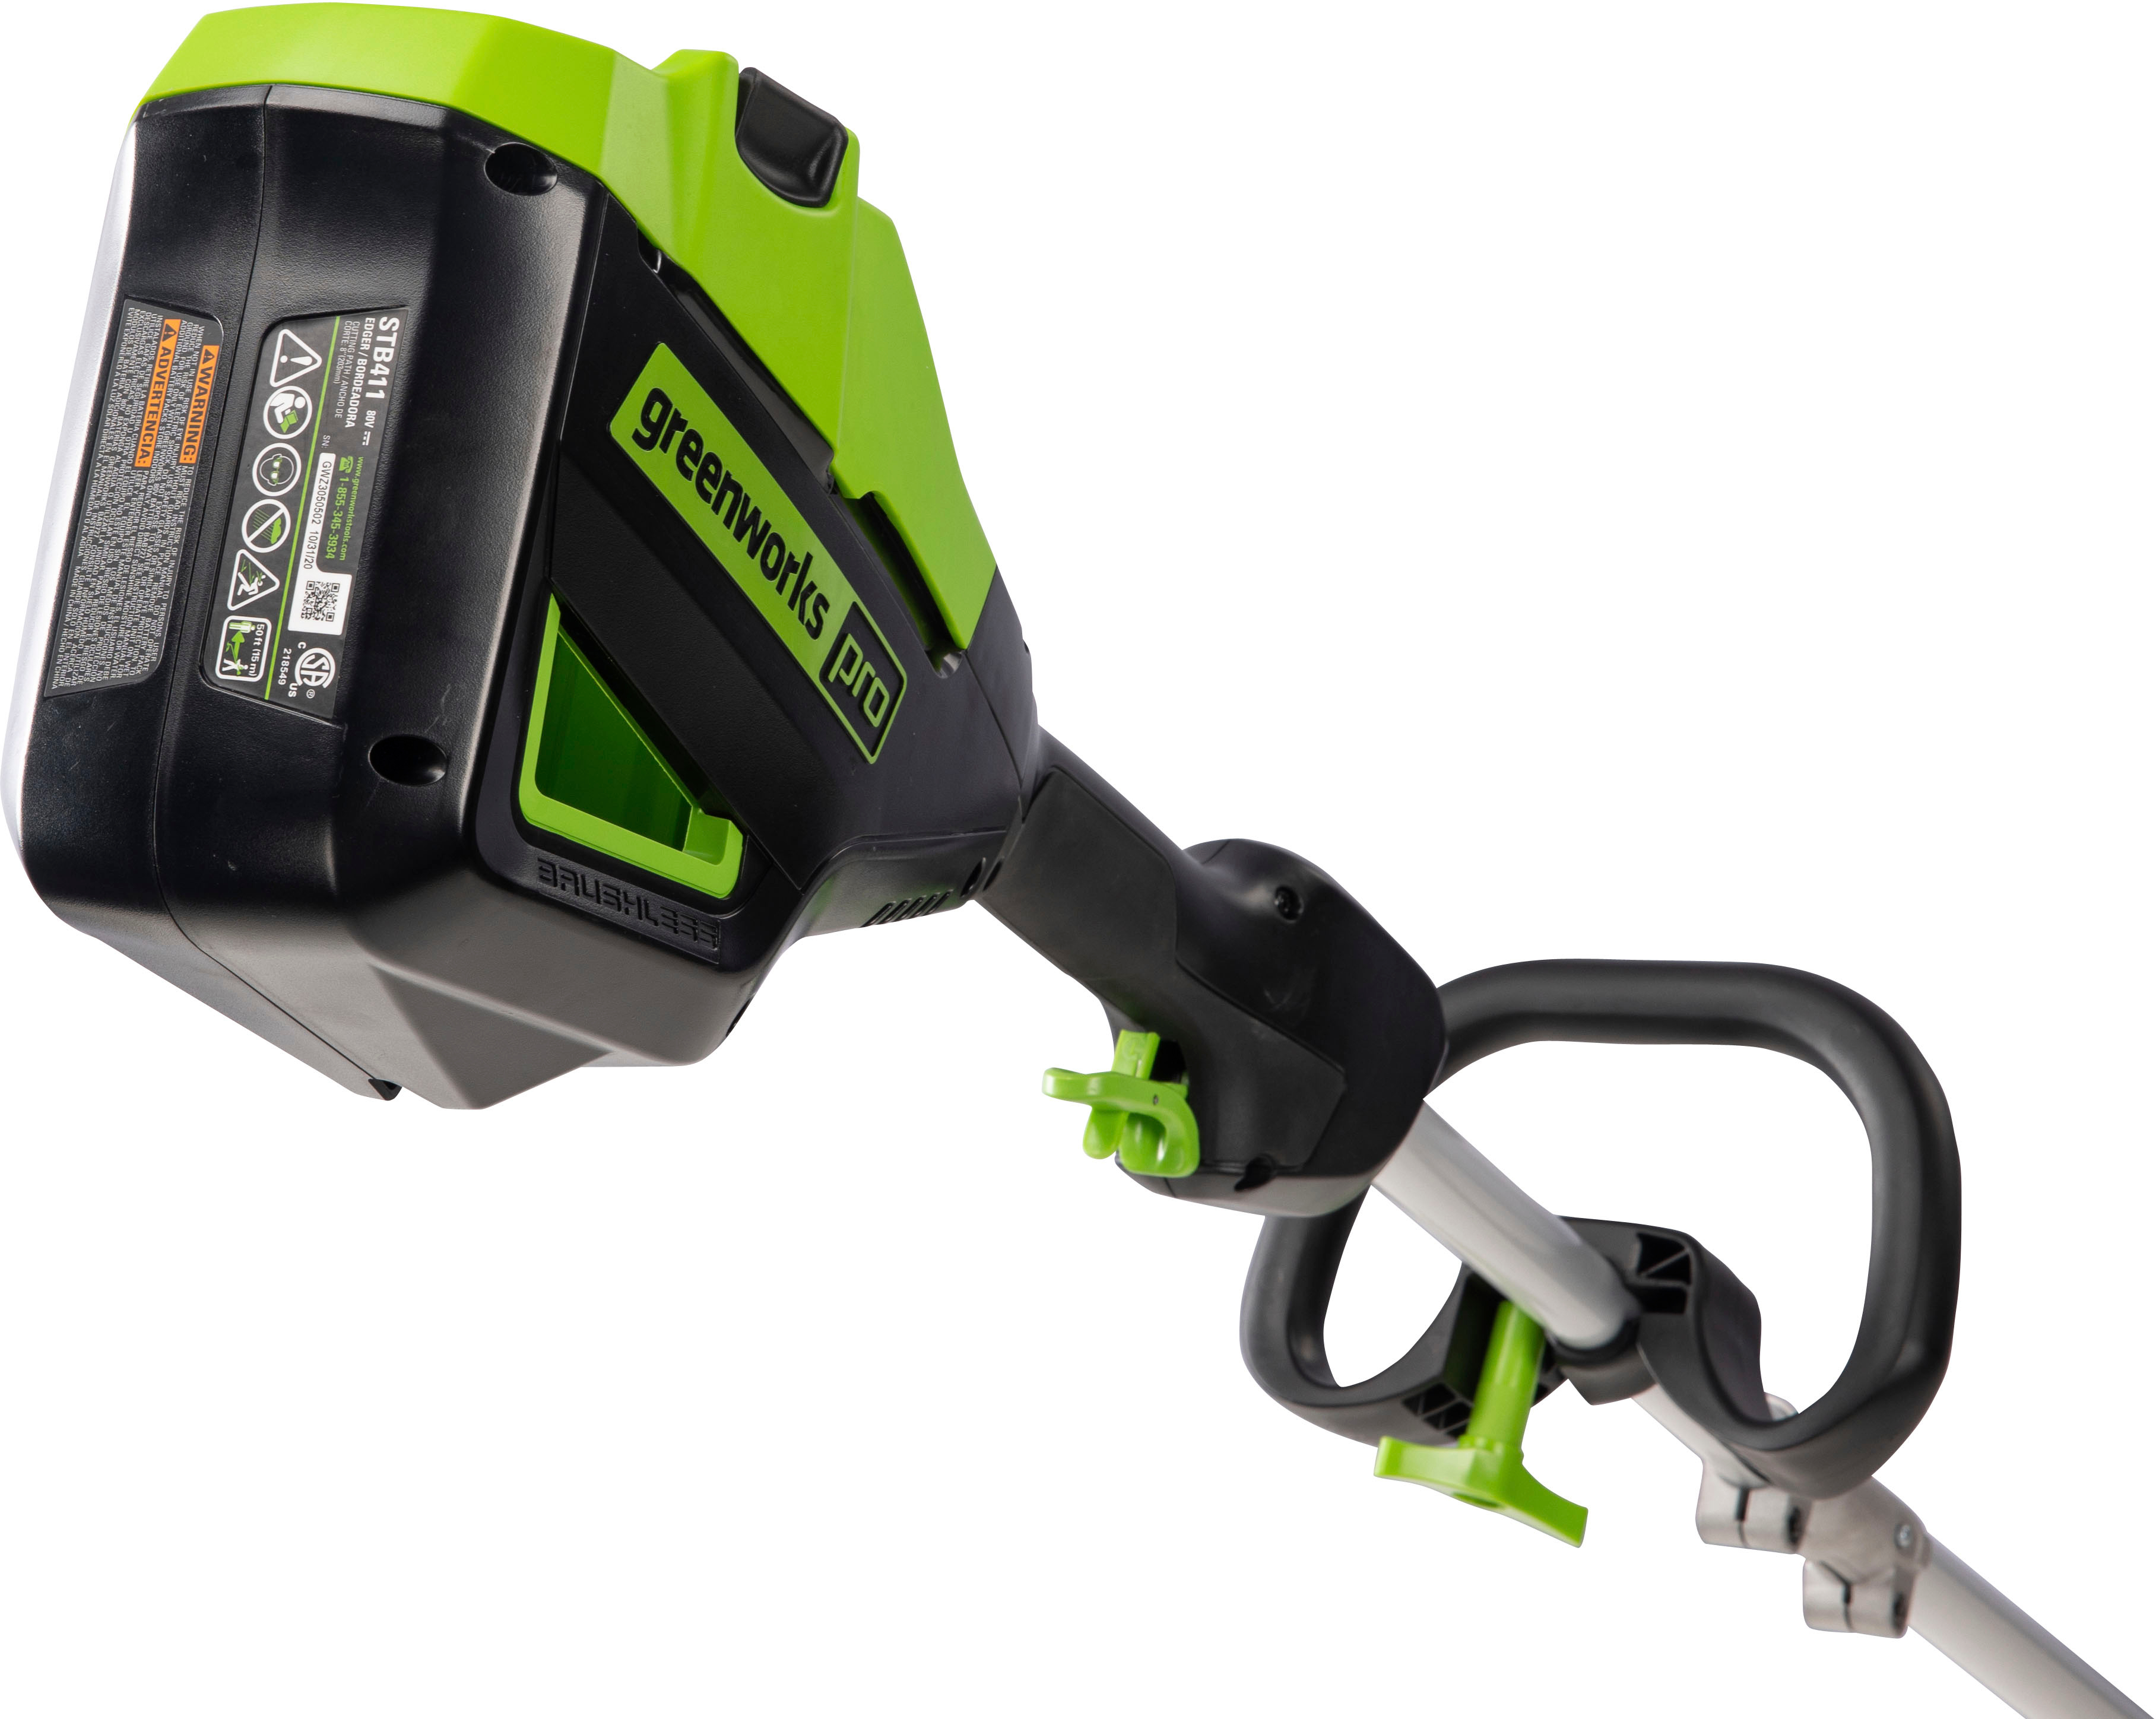 Angle View: Greenworks - 80V 16” Brushless Attachment Capable String Trimmer with 2.0 Ah Battery and Rapid Charger - Black/Green